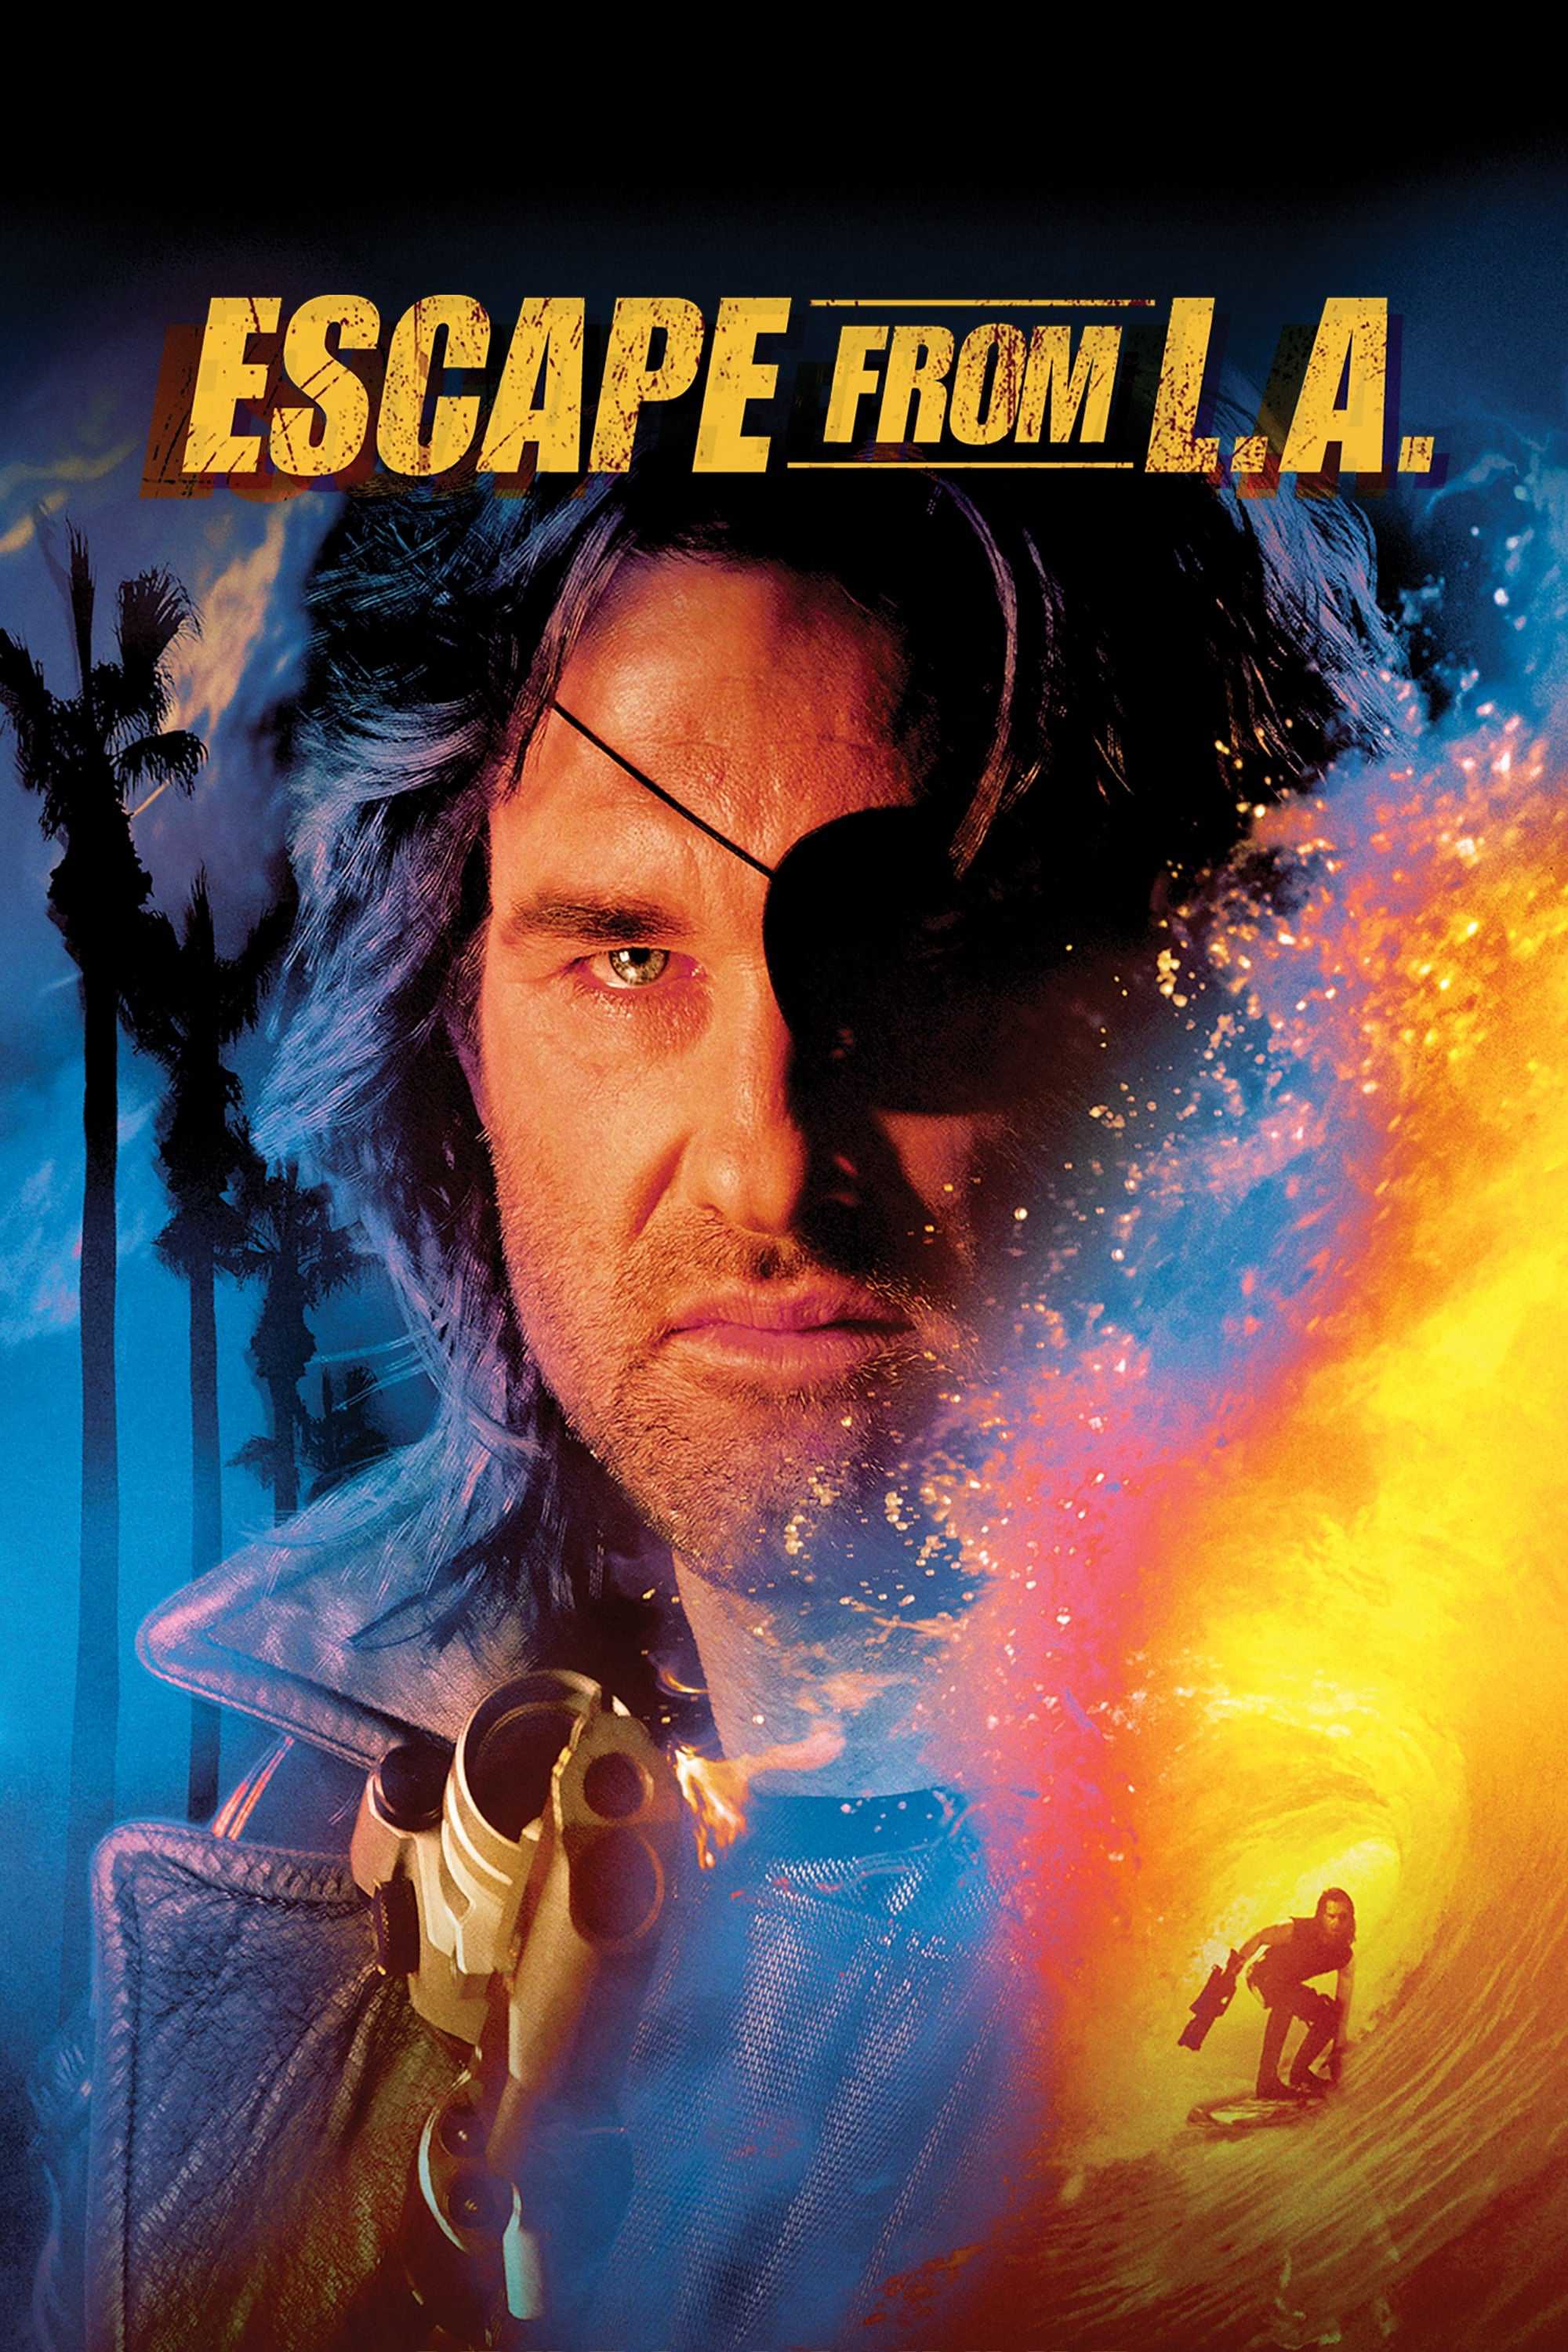 Thoát khỏi los angeles - Escape from l.a.